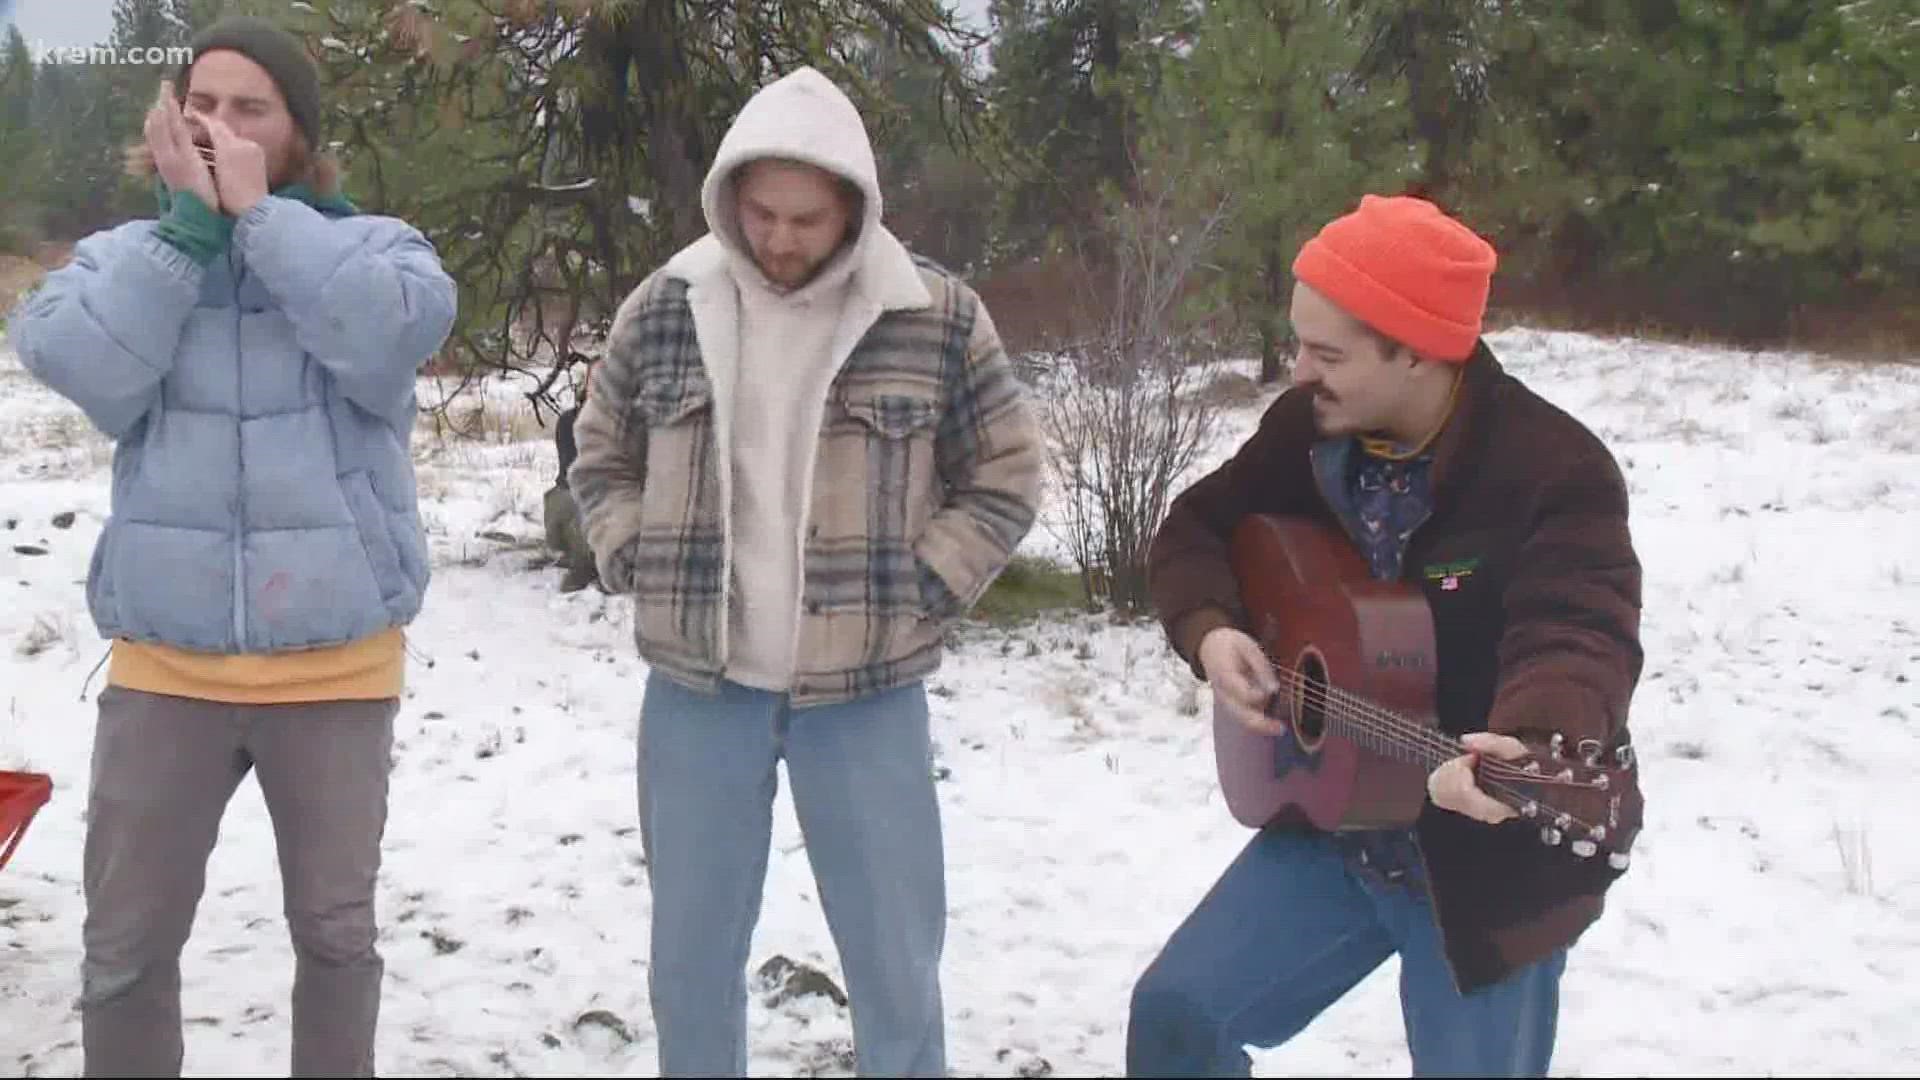 German rock band, Milky Chance, plants trees in Spokane ahead of sold out show.